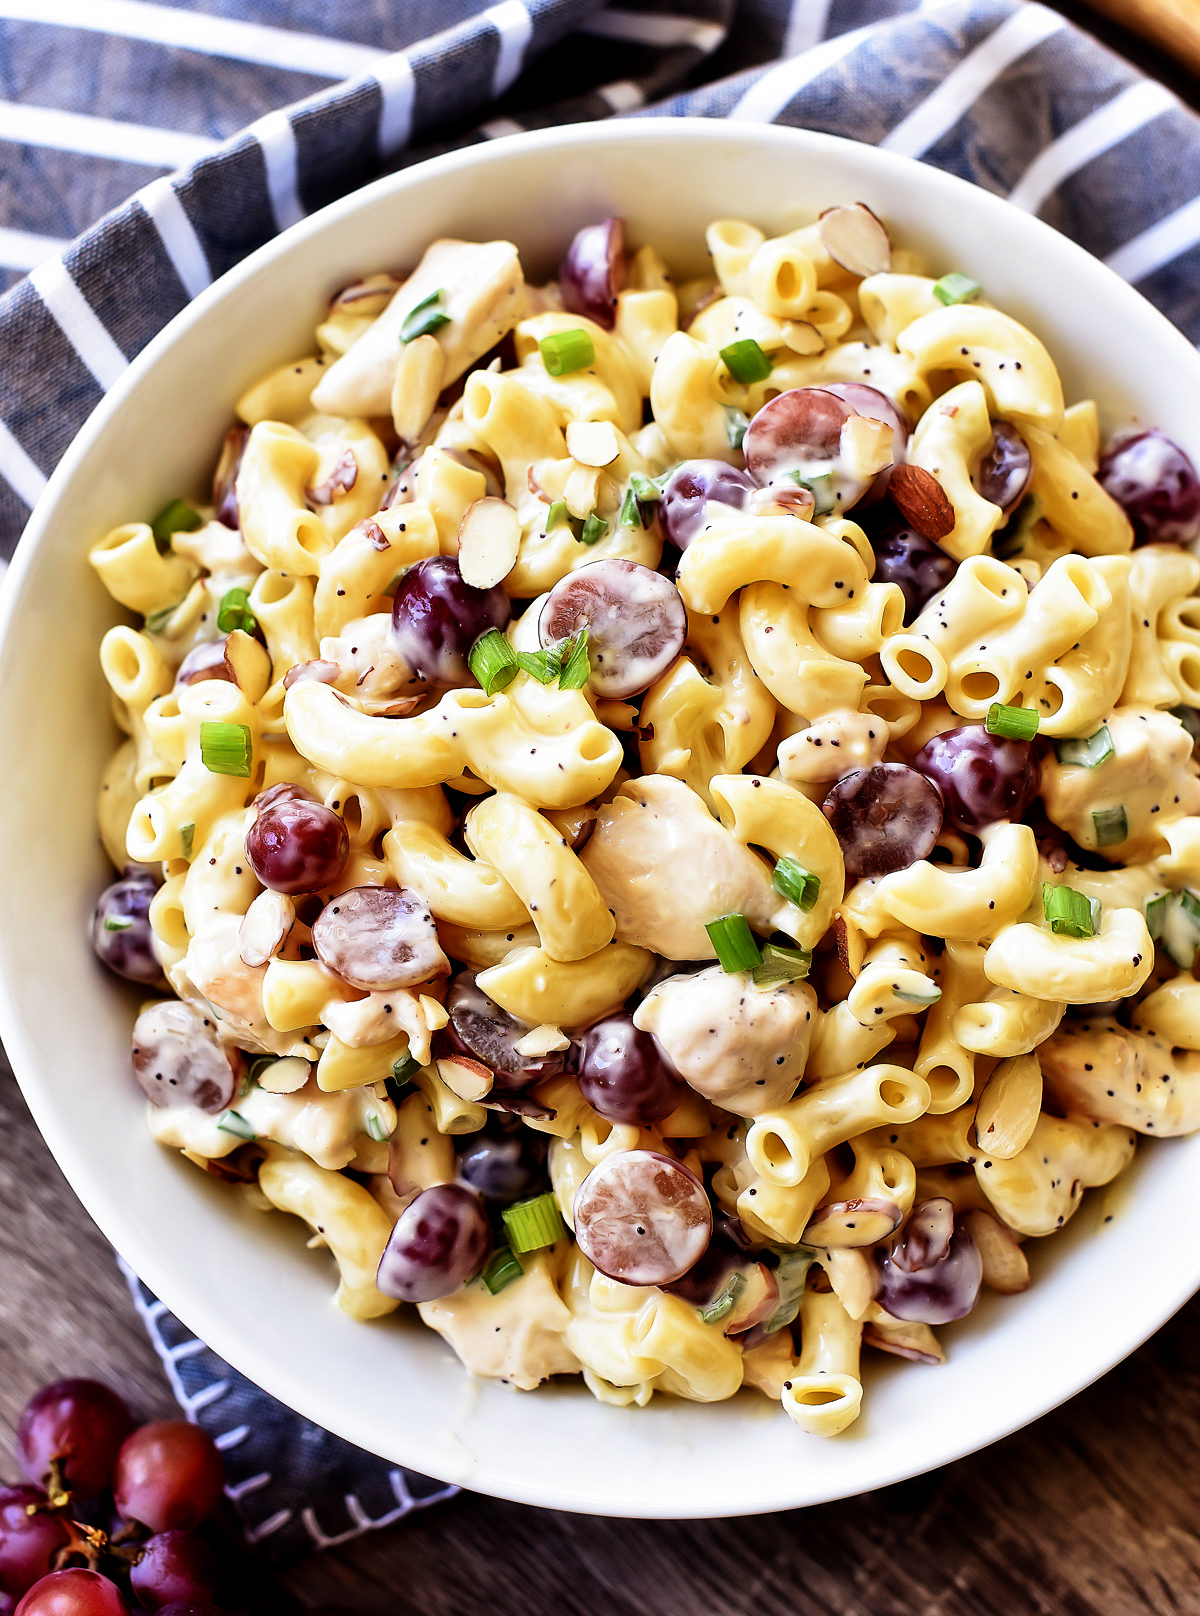 Poppy Seed Chicken Grape Pasta Salad is a pasta salad filled with seasoned chicken, pasta, grapes, green onion and covered in poppy seed dressing. Life-in-the-Lofthouse.com